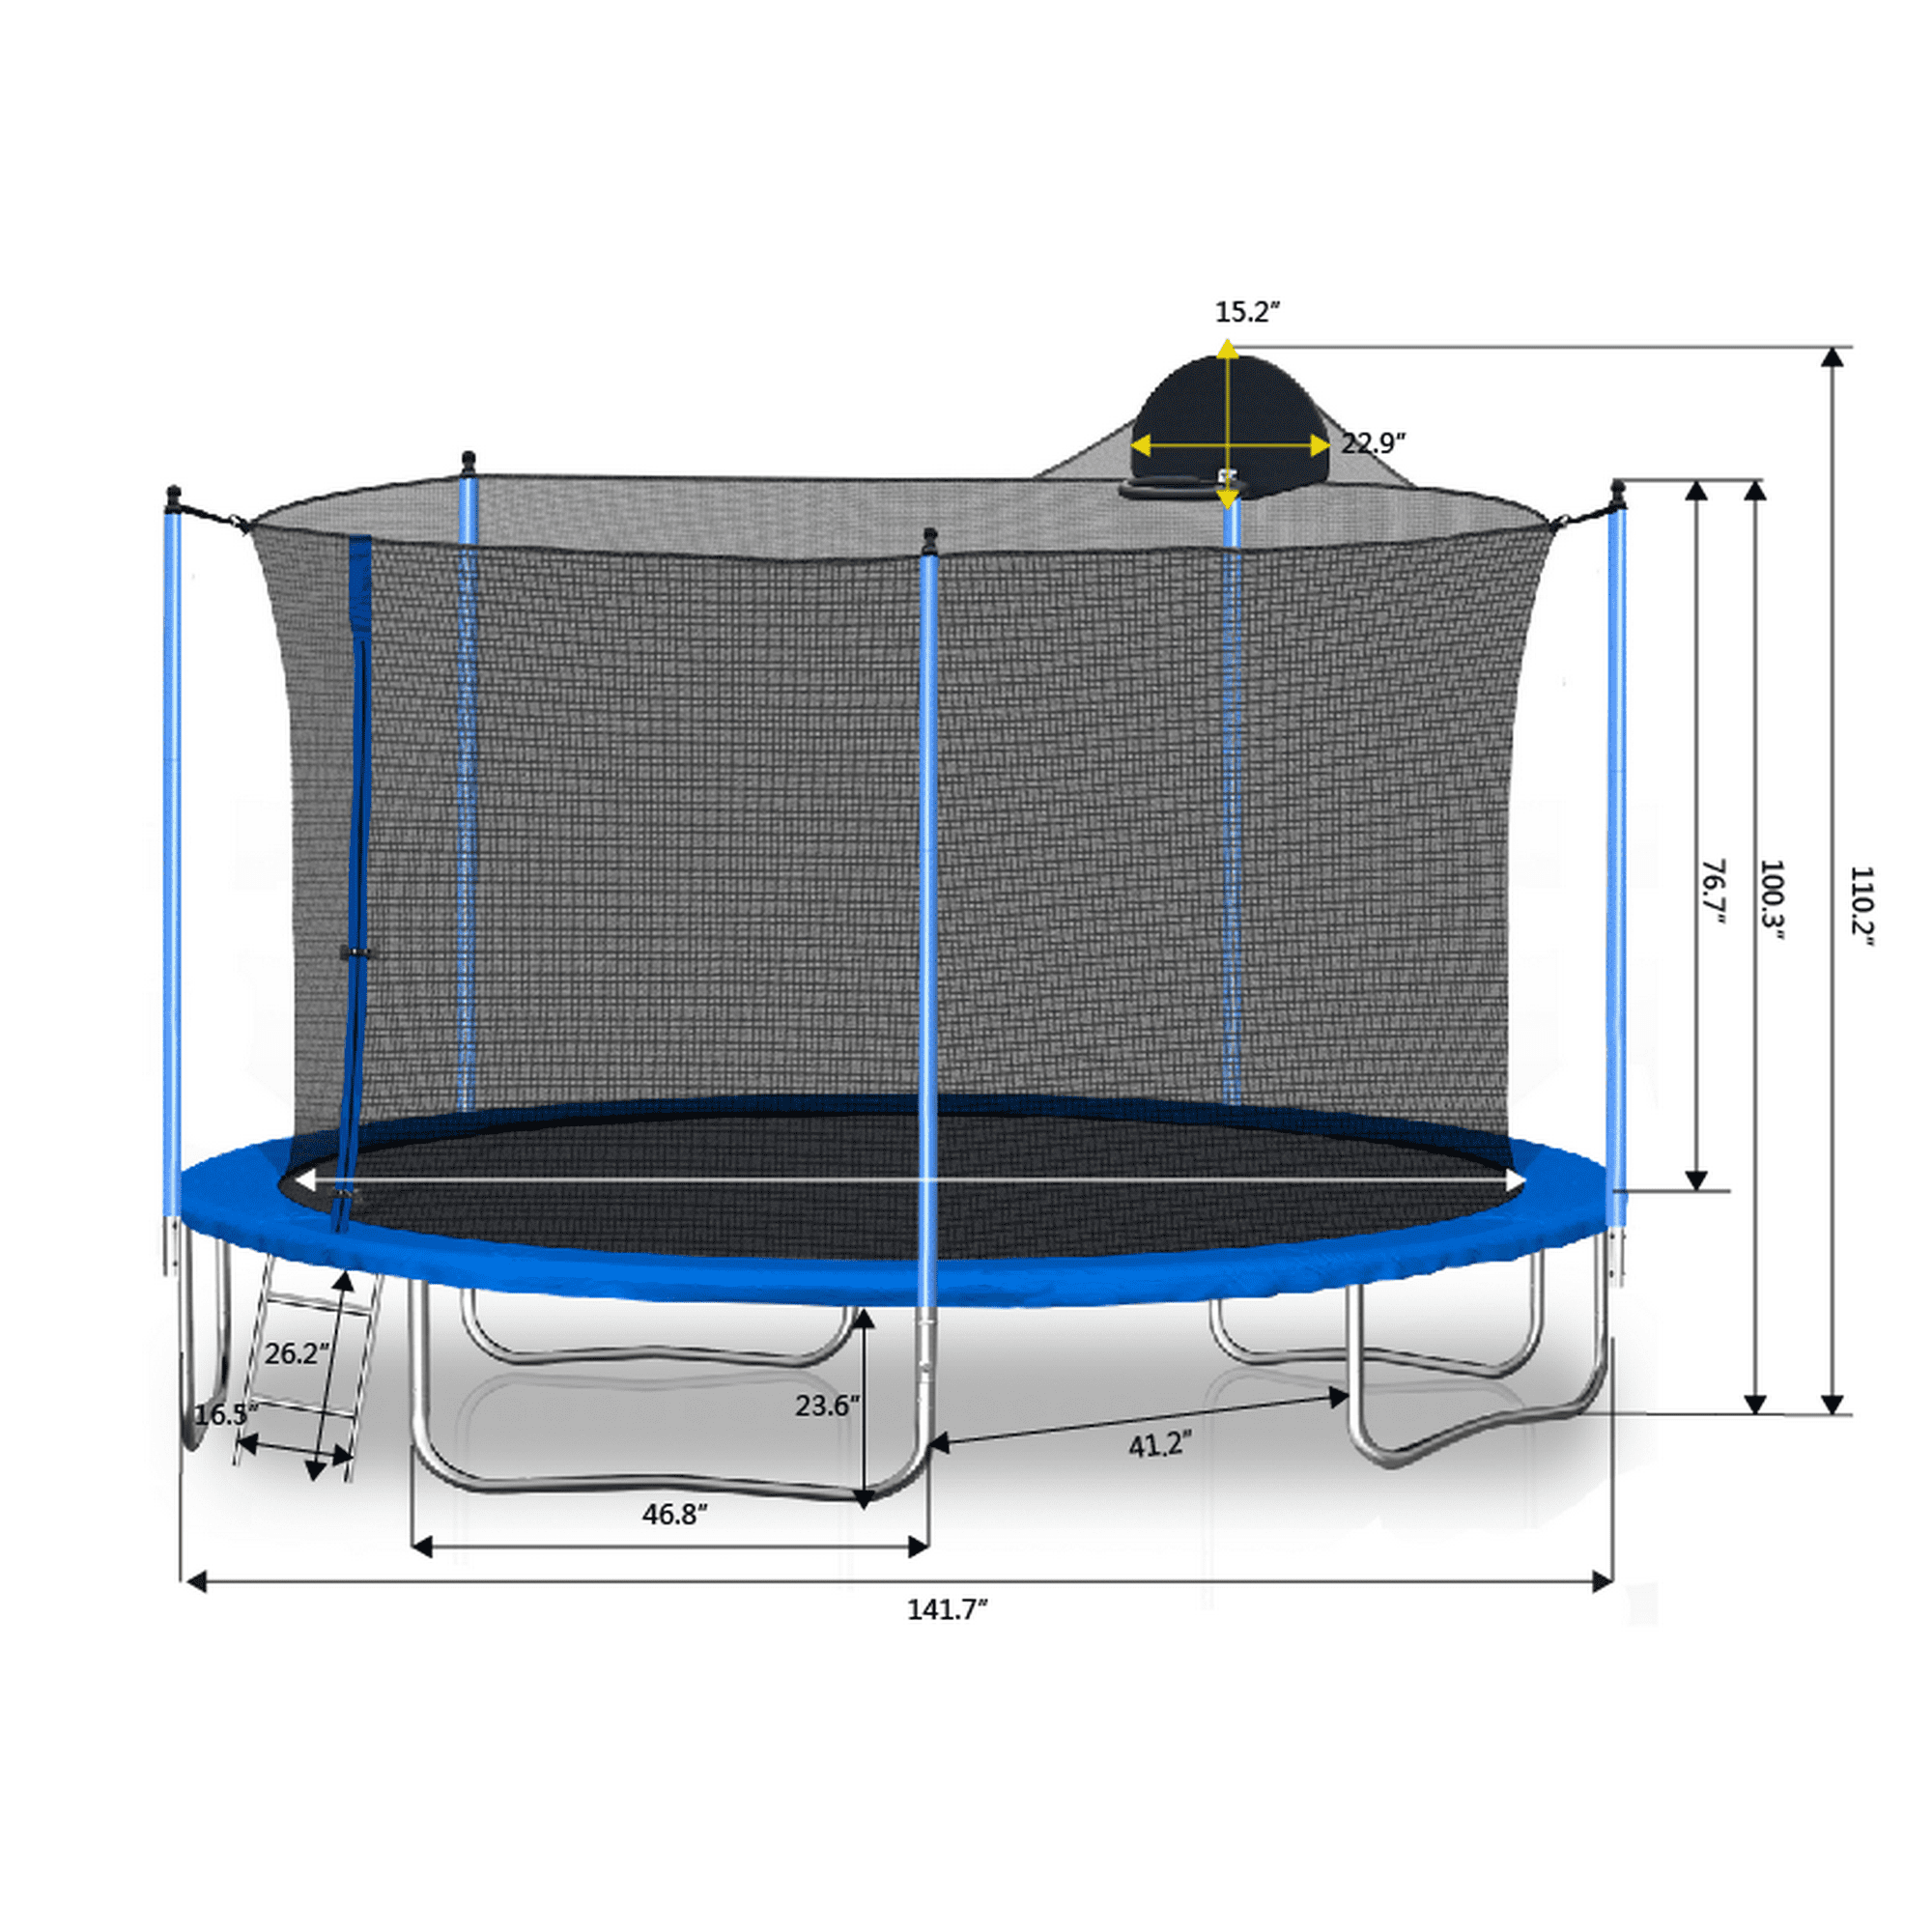 uhomepro 12-Foot Kids Trampoline for Backyard, Outdoor Trampoline with Board, Safety Enclosure Net, Steel Tube, Circular Trampolines for Adults Kids, Family Jumping and Ladder, Kids Round Trampoline